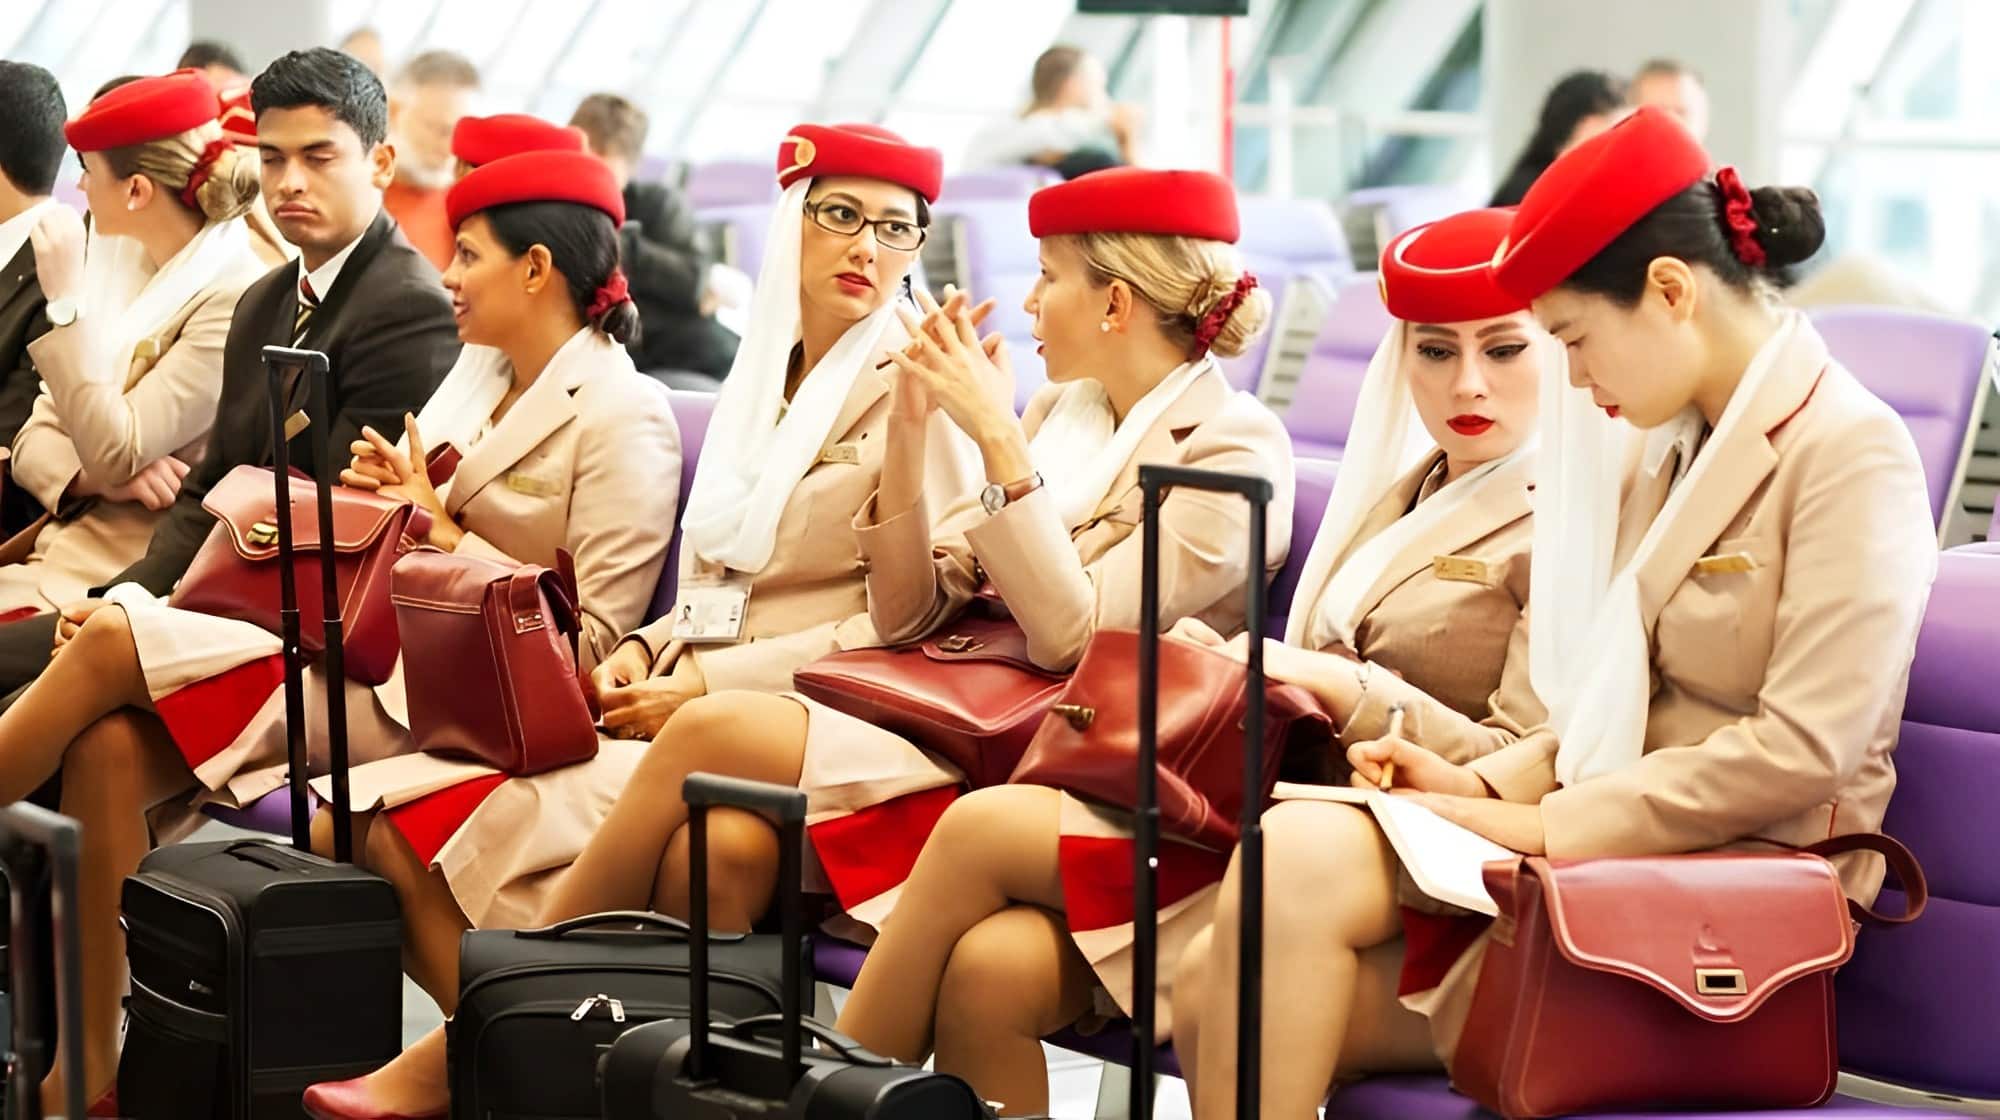 Emirates Increases Employee Salaries After Record Profits